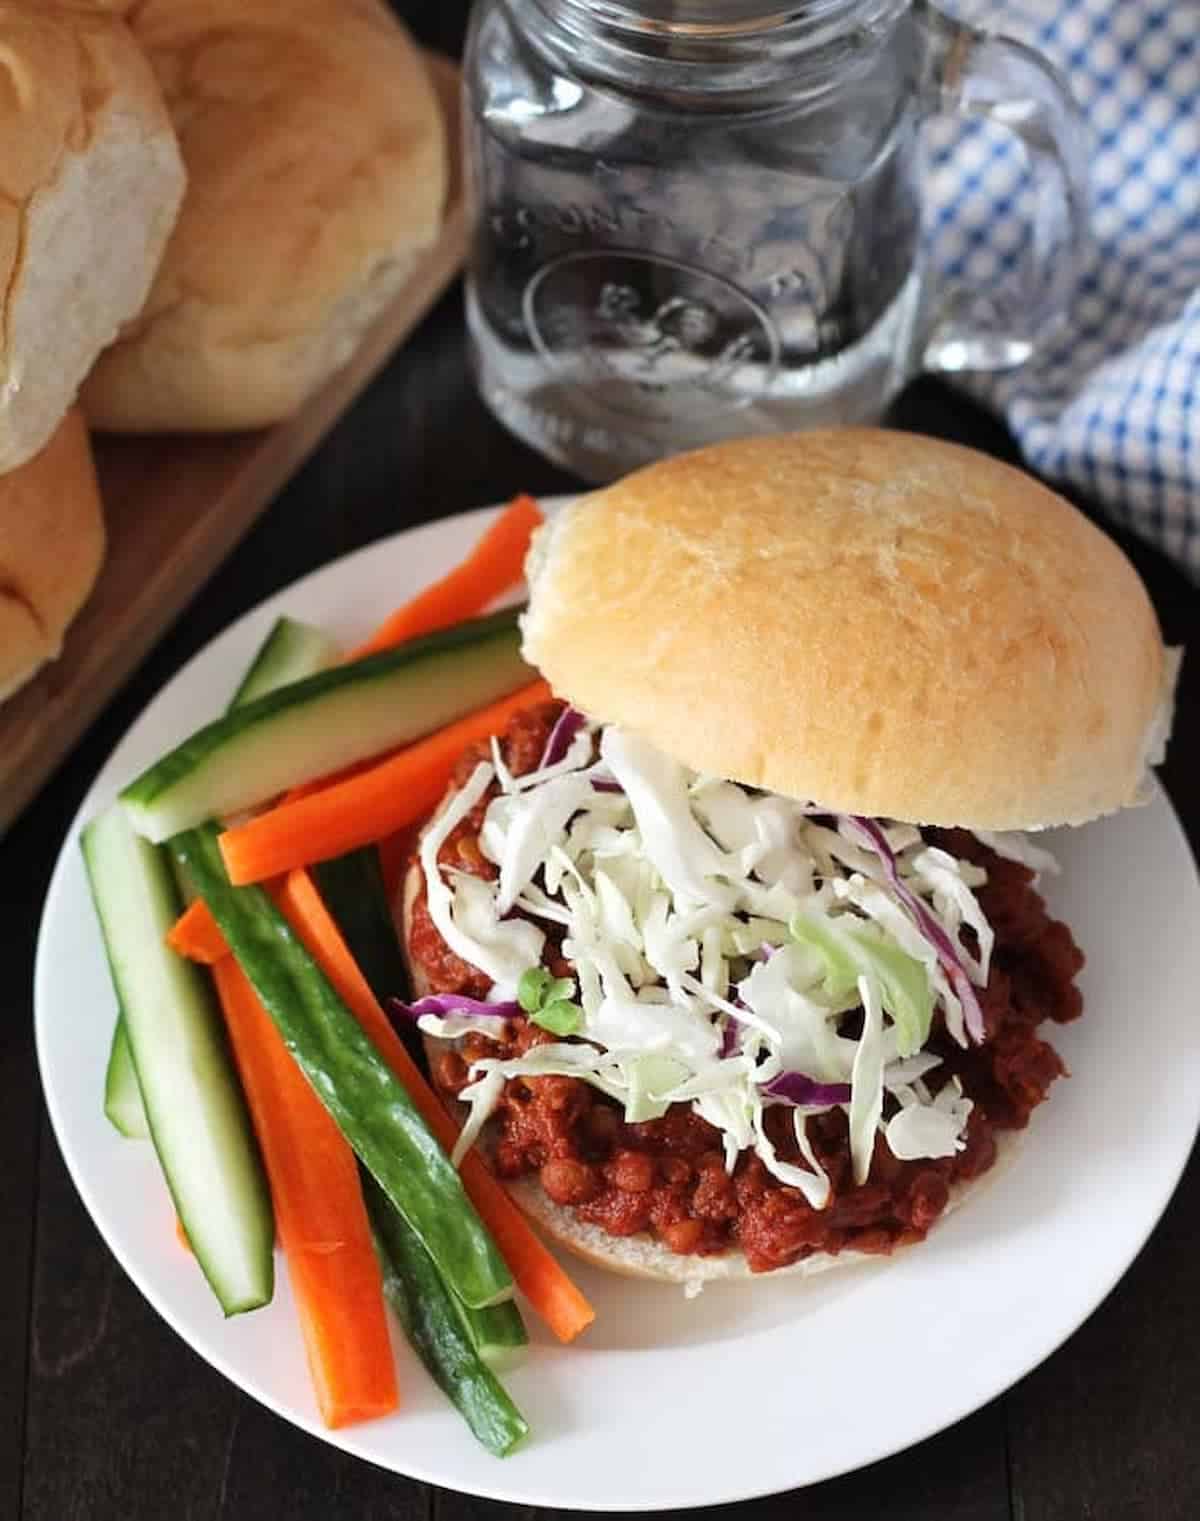 Vegan lentil Sloppy Joes on a bun served with slices of carrots and cucumber.